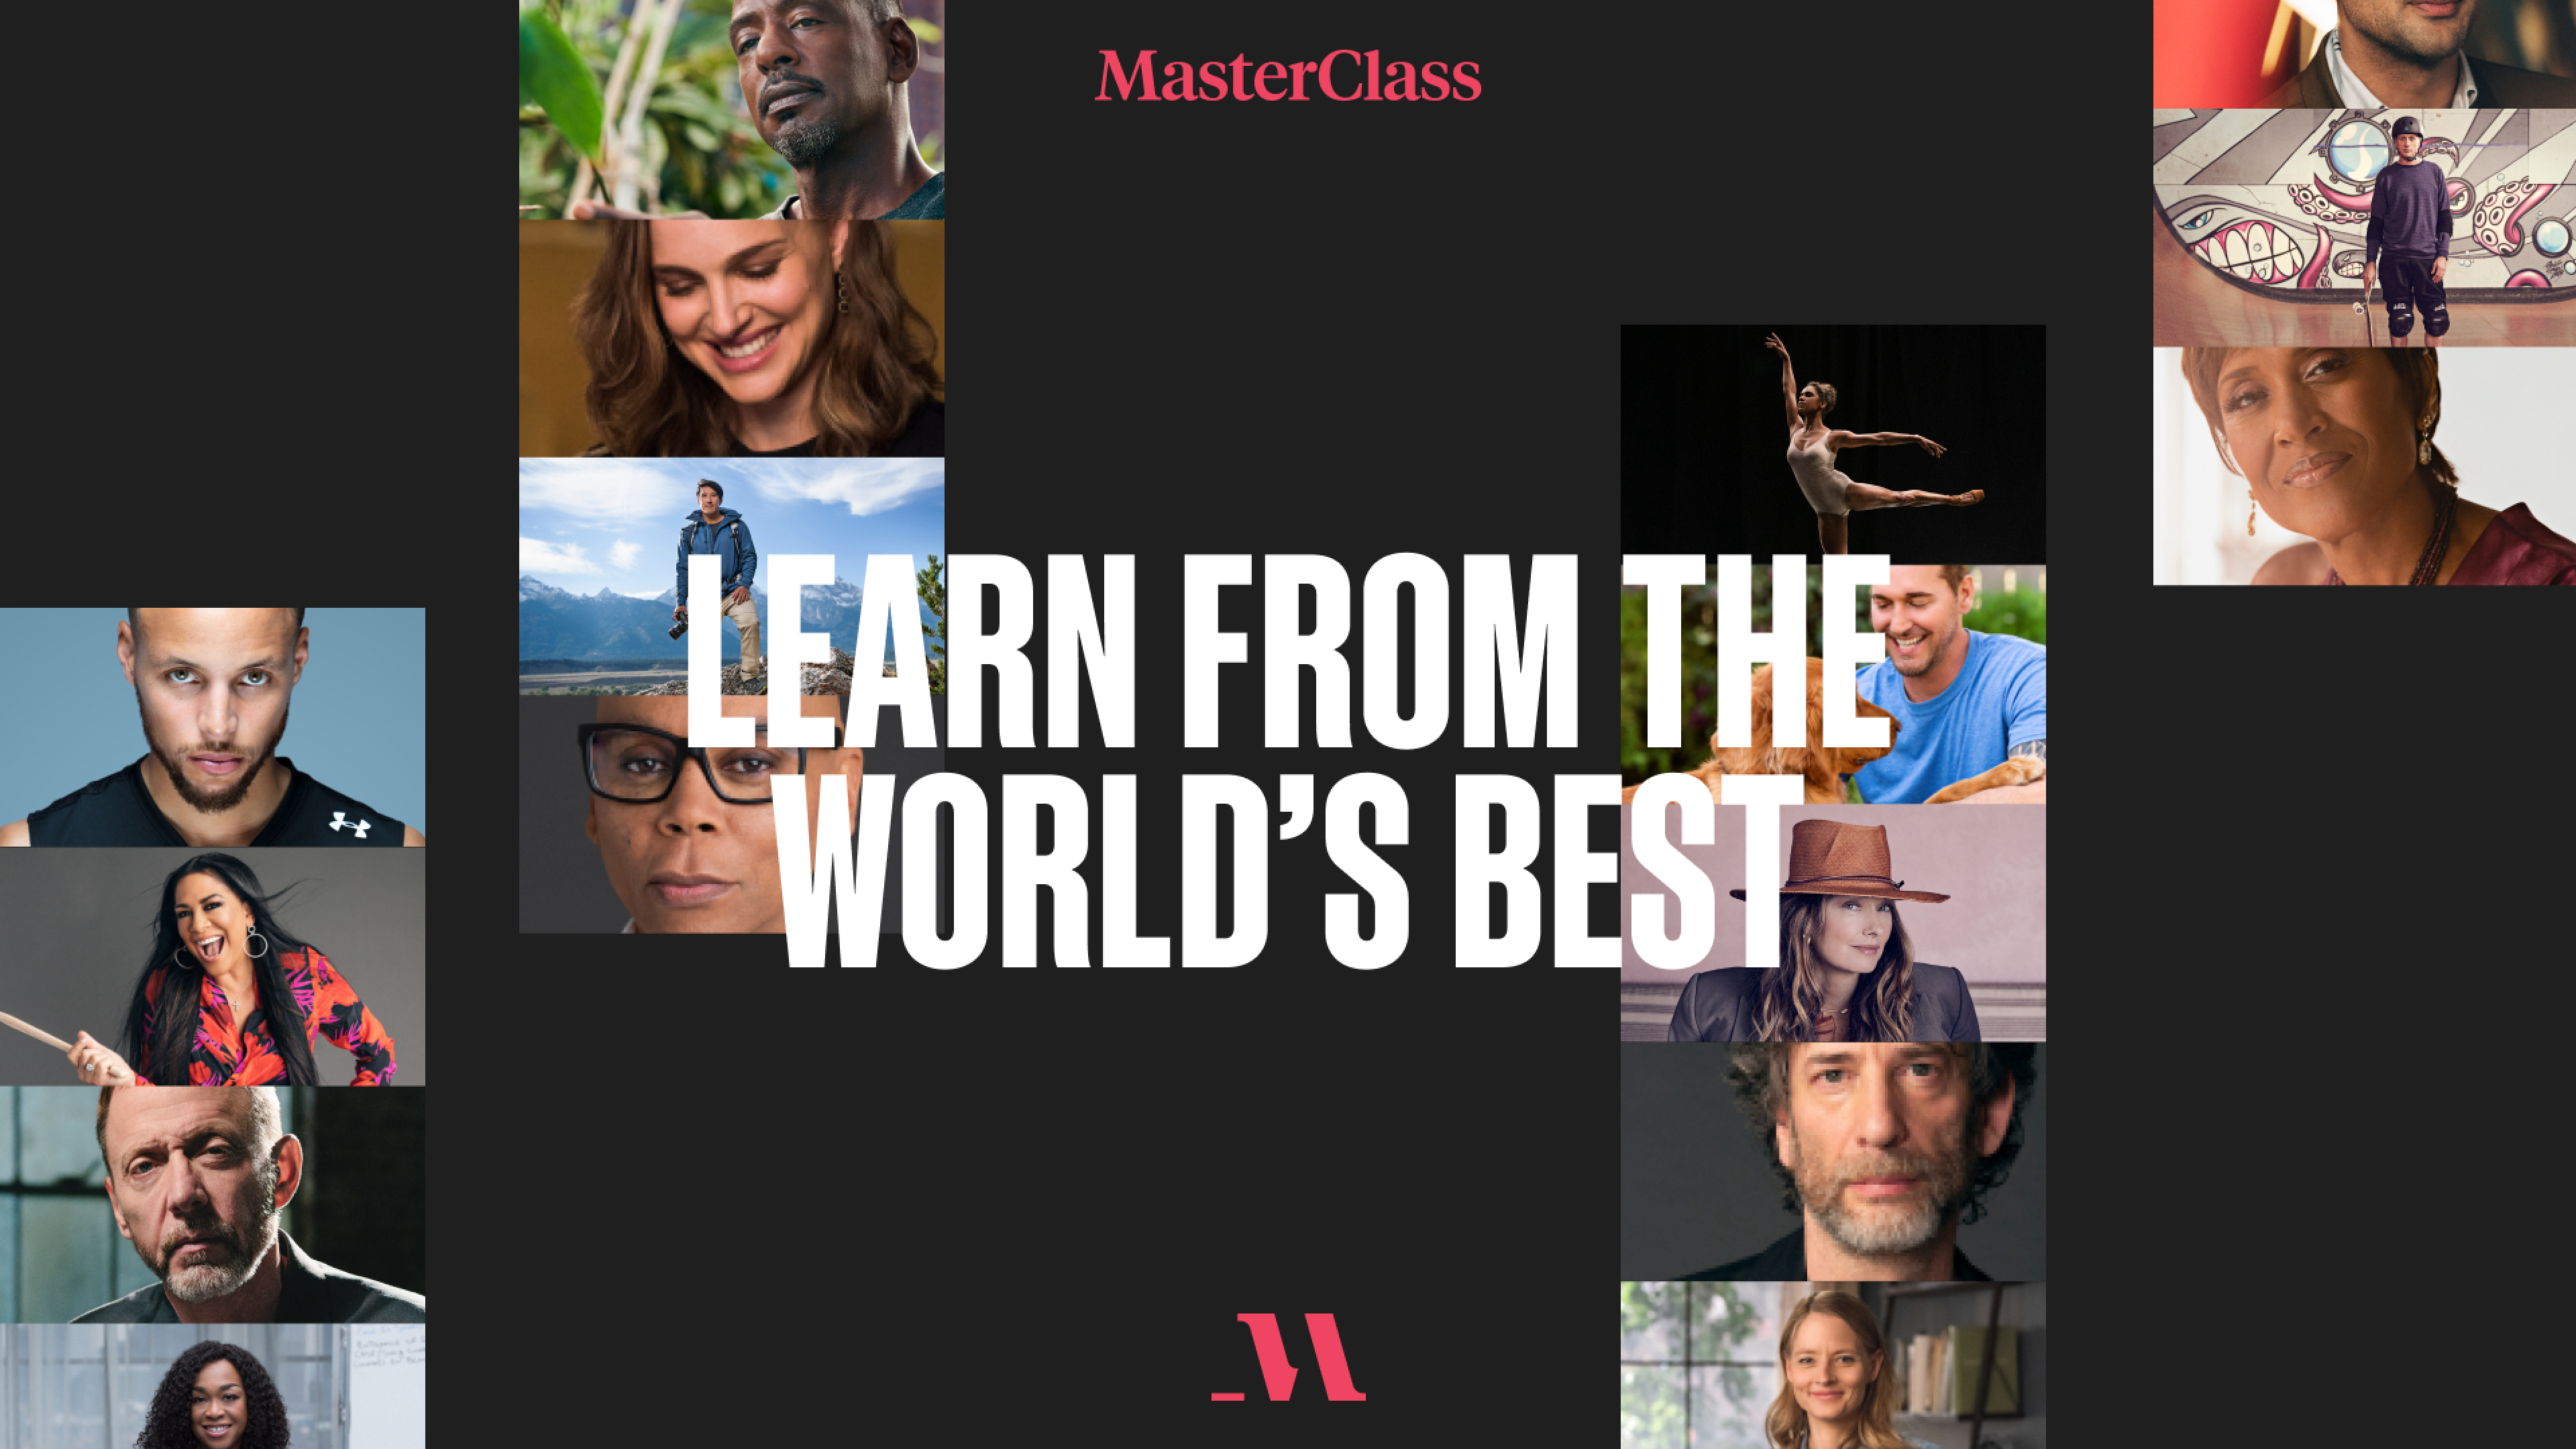 masterclass monthly subscription that offers online courses in various topics